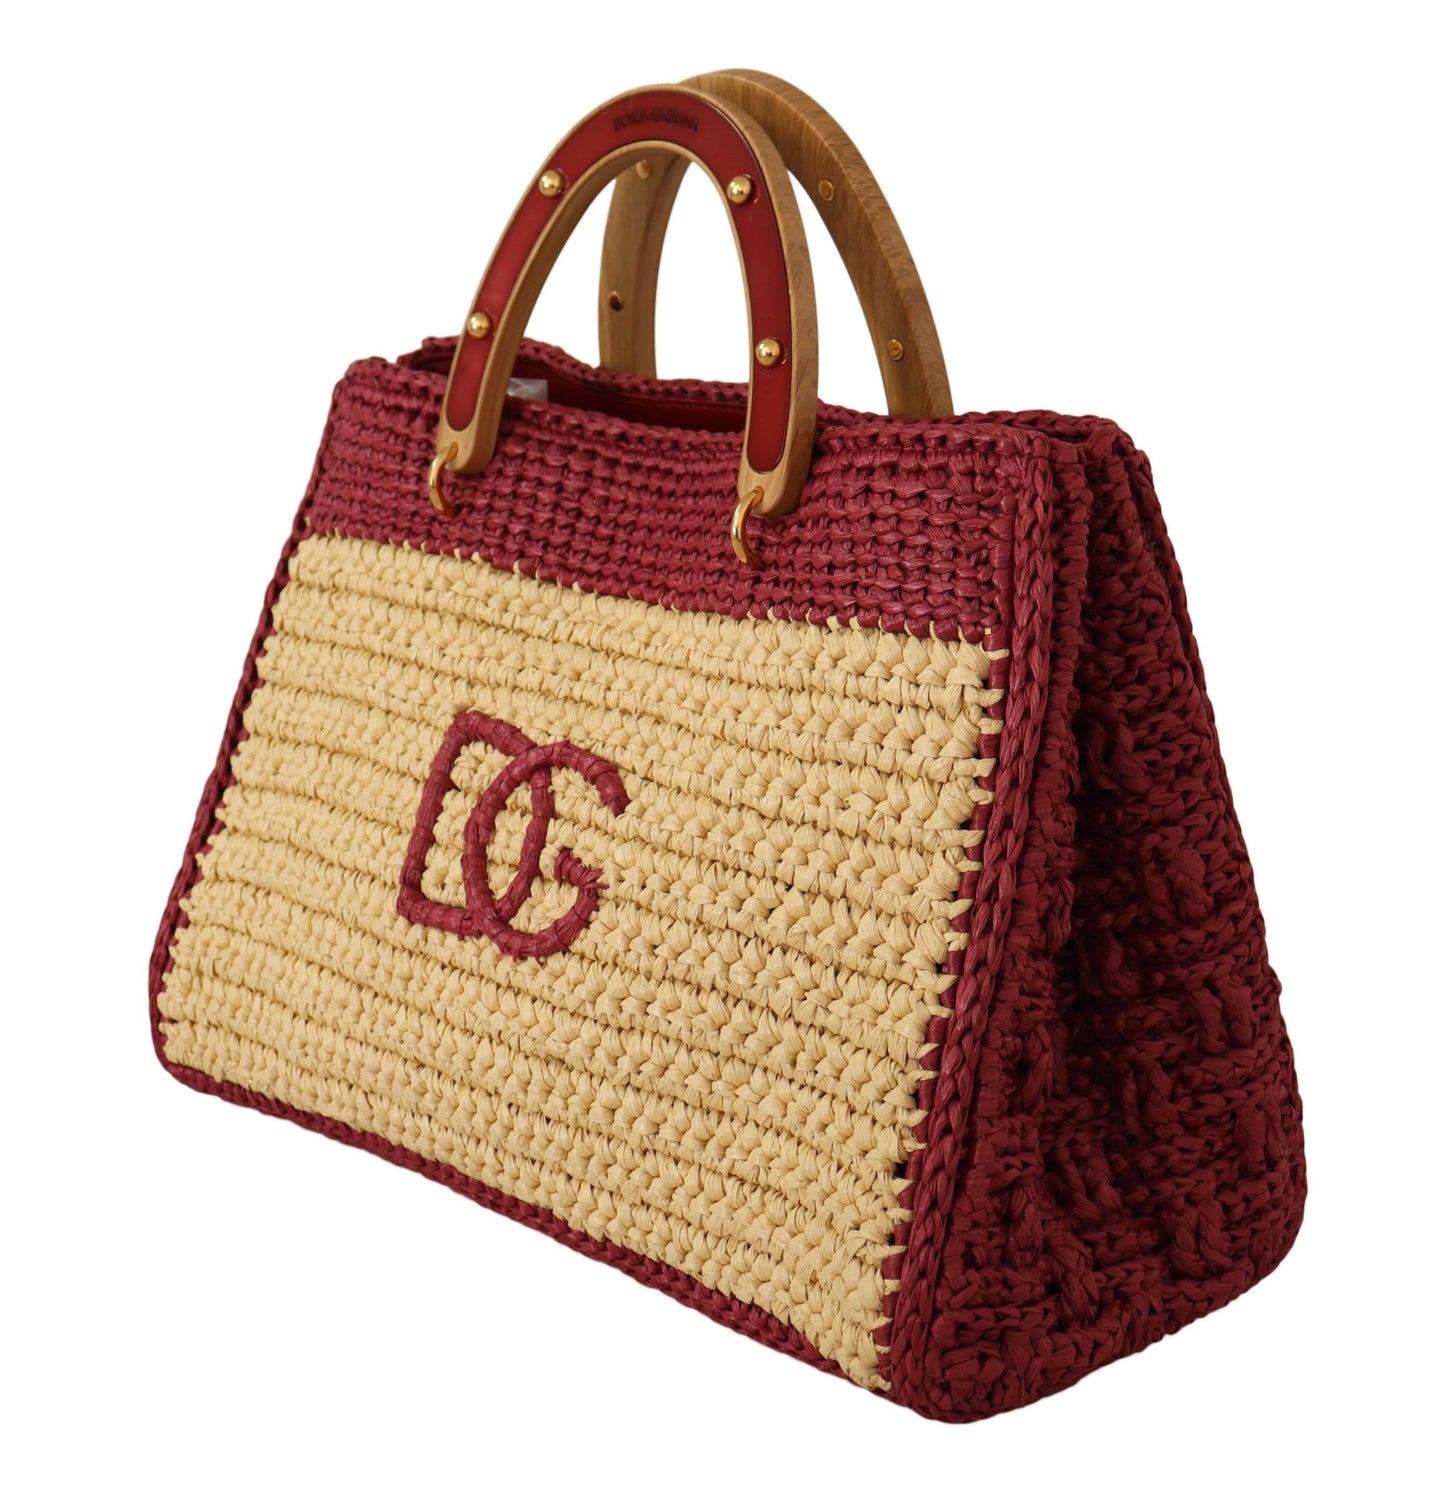 Chic Beige Raffia Tote with Maroon Accents